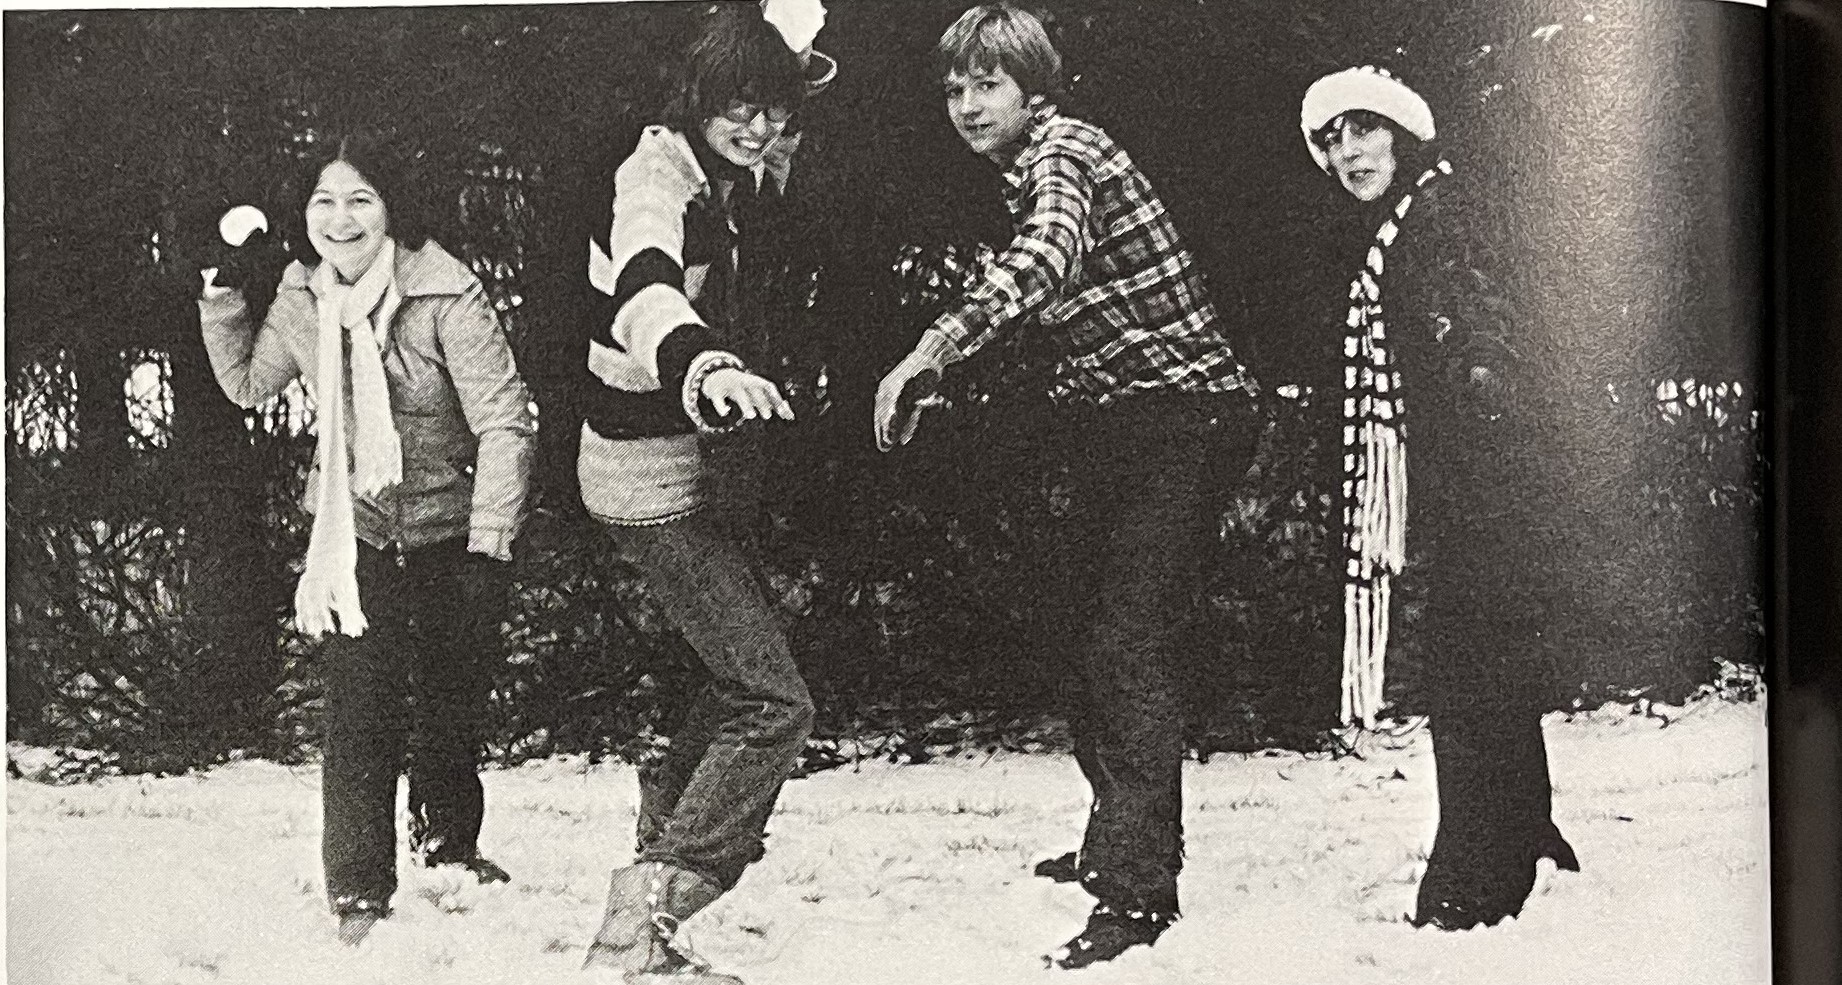 Four U of O students posing in a stance about to throw snowballs towards the camera. 